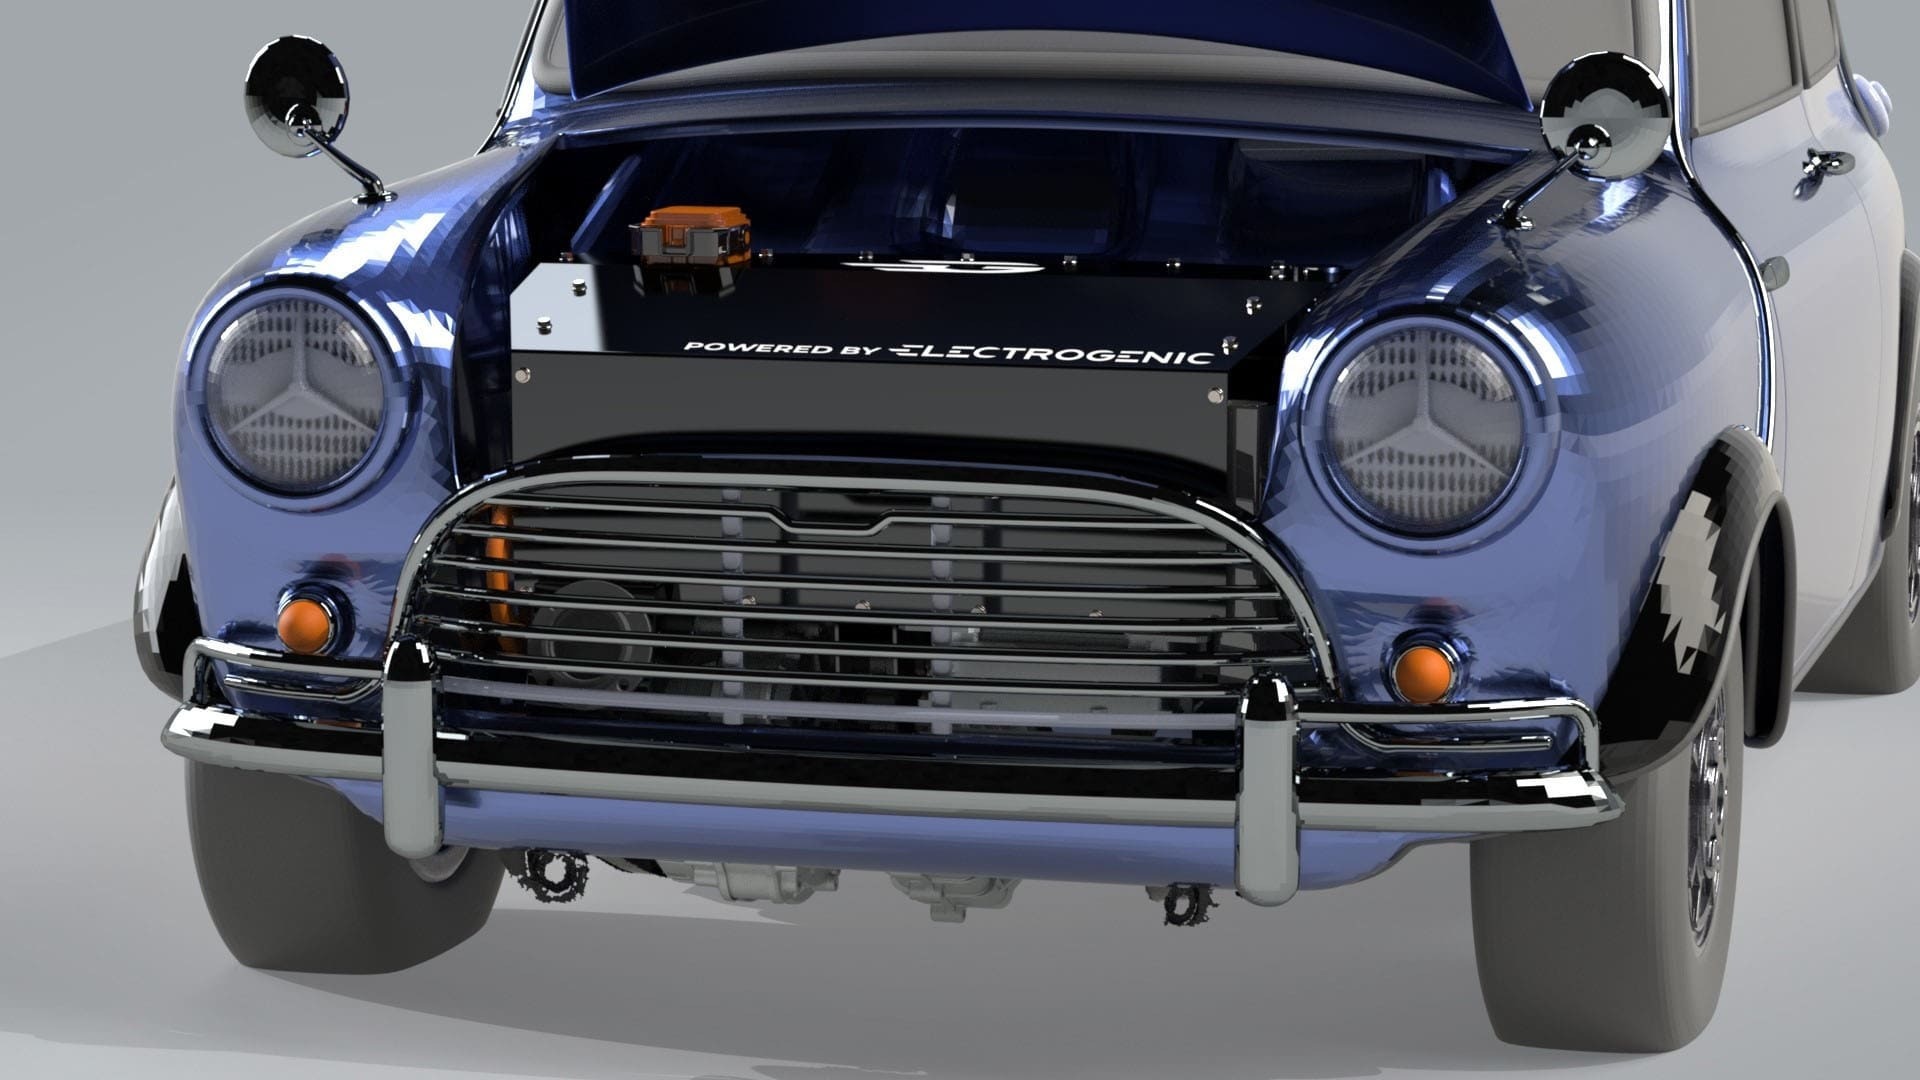 That’s how easy it is to turn a classic Mini into an electric car with this conversion kit